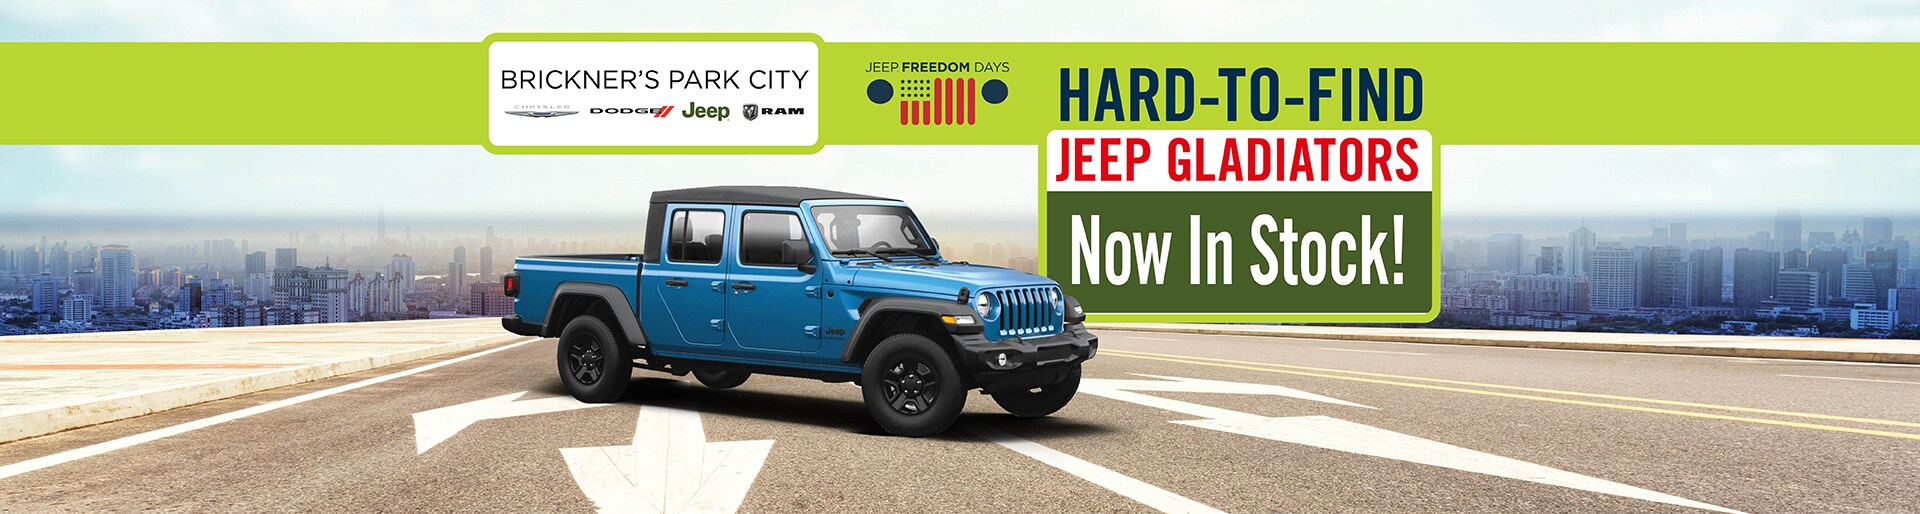 Hard To Find Jeep Gladiators Now In Stock | Merrill, WI 54452